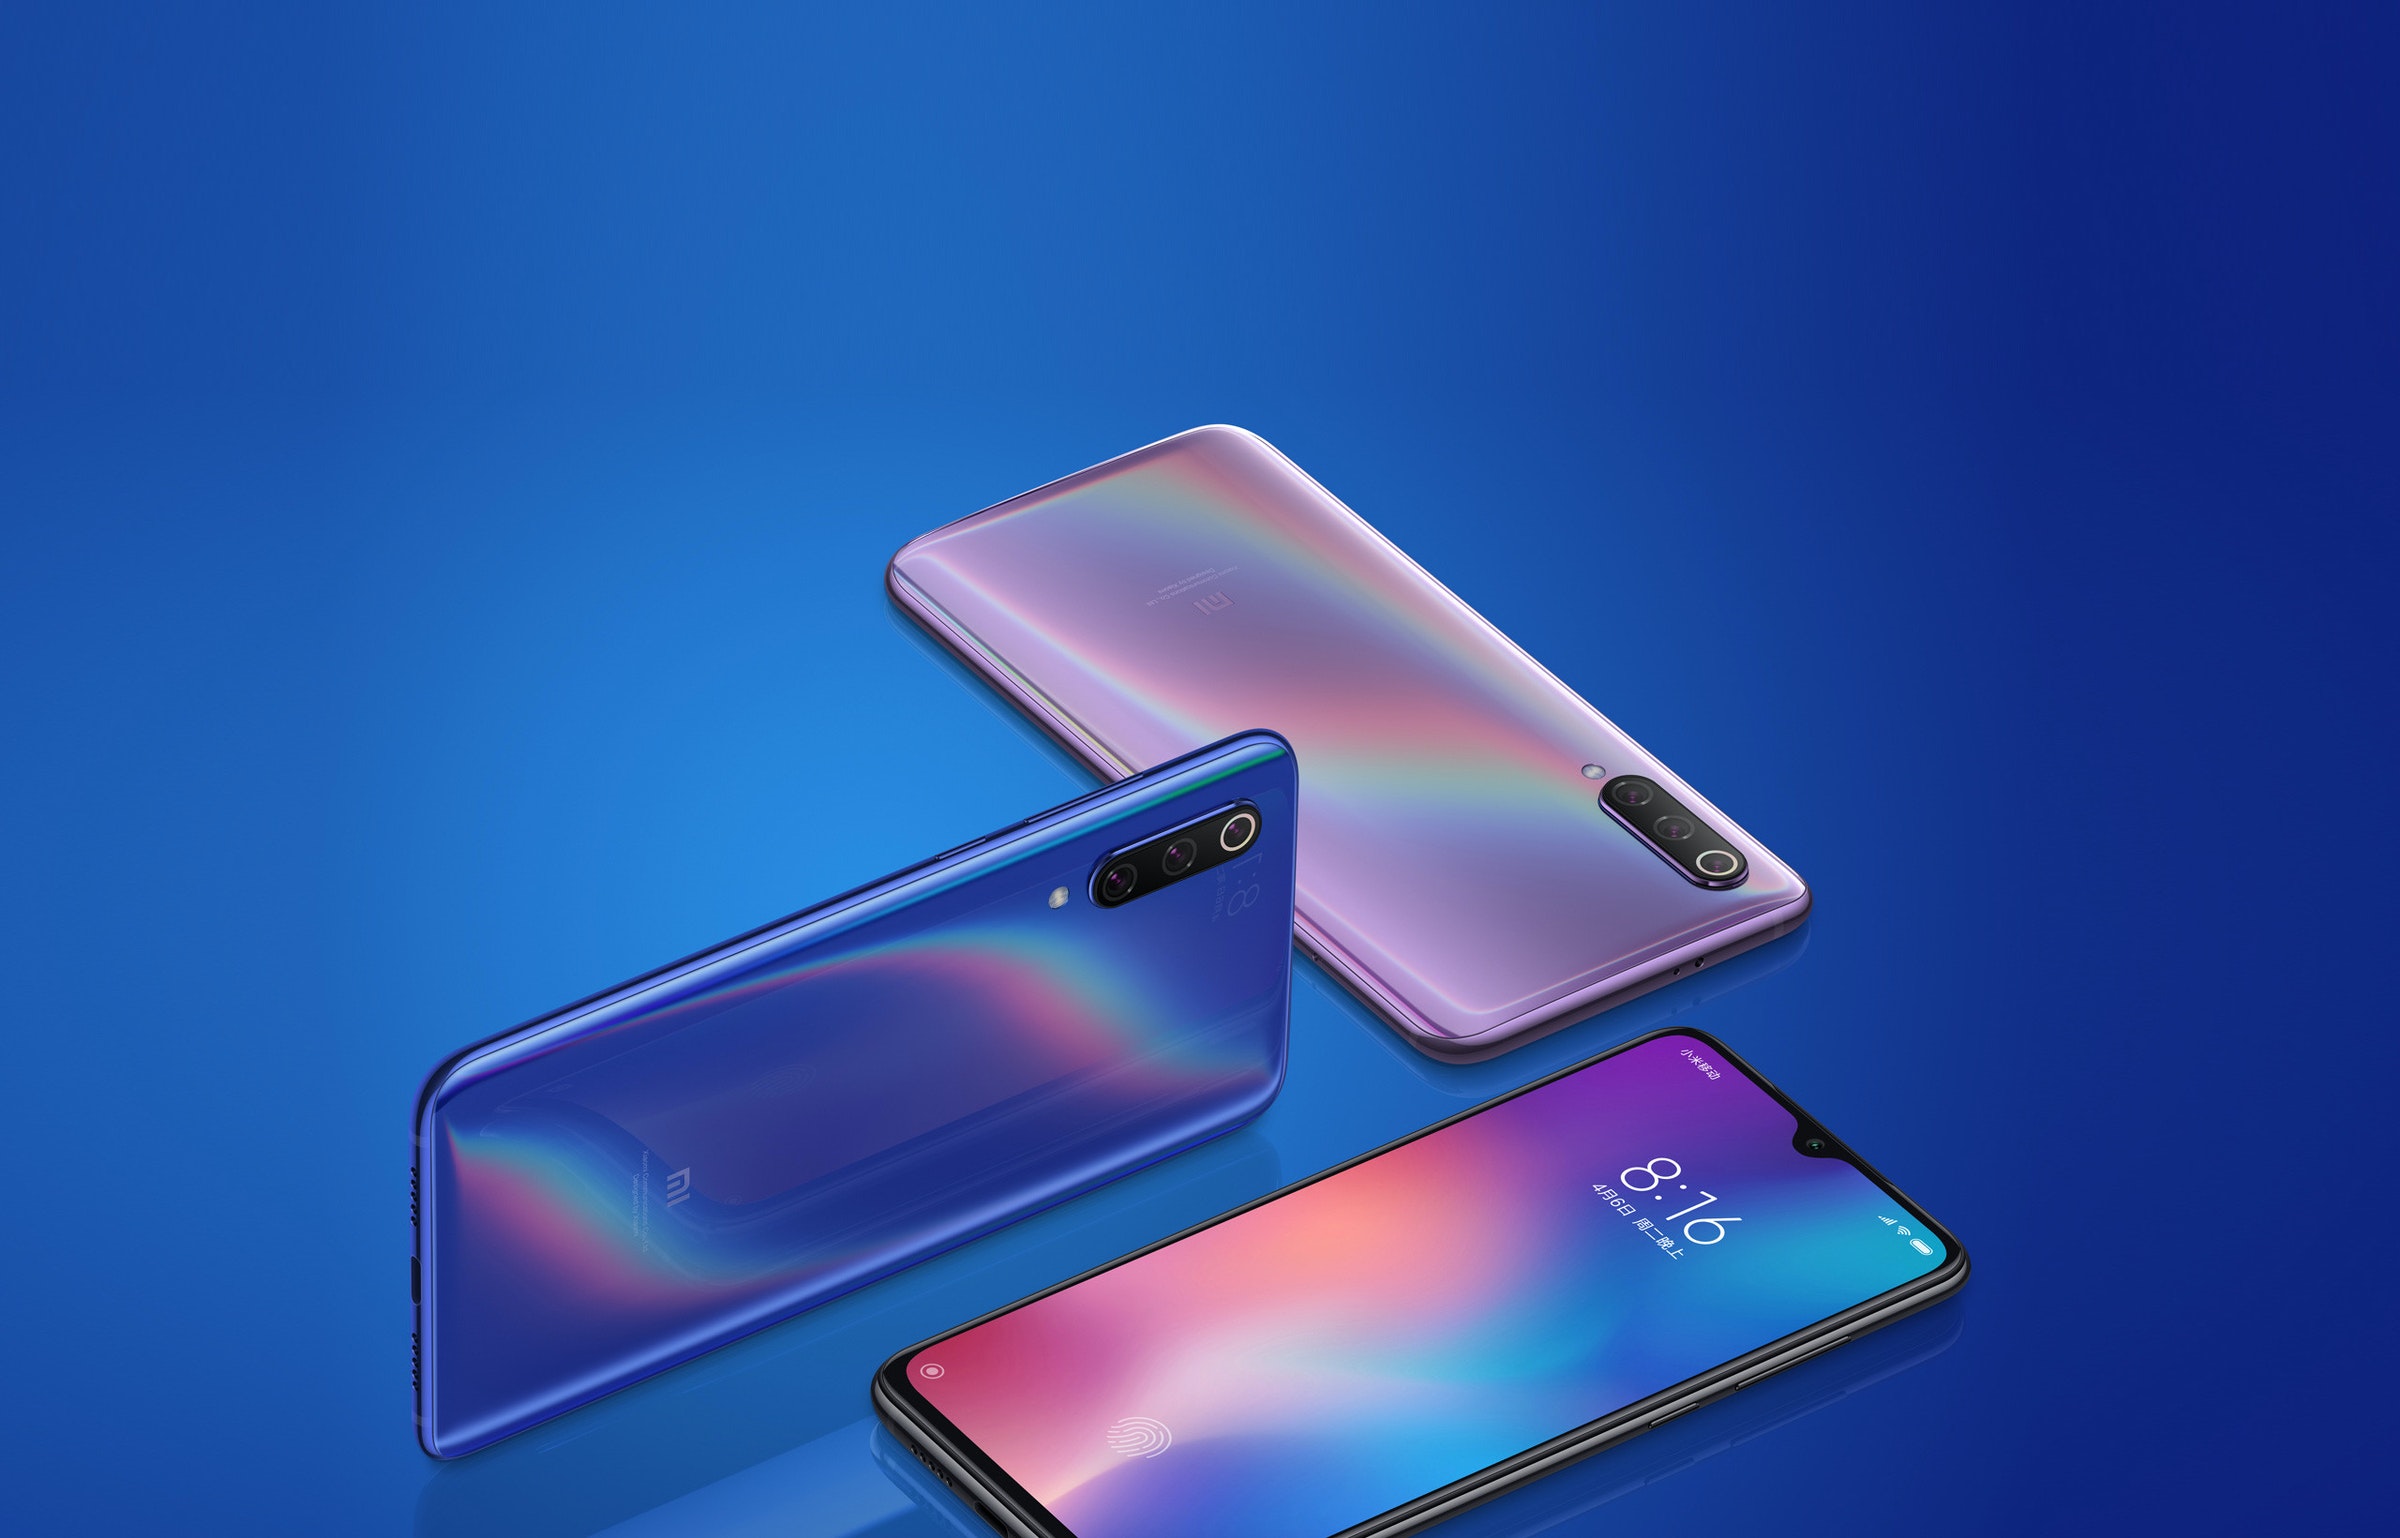 Xiaomi Mi 8, Xiaomi Mi MIX 3, Xiaomi, , Xiaomi Mi 9, Xiaomi Mi 1, Michigan, 小米9 SE, Qualcomm Snapdragon, Smartphone, mi 9, Blue, Product, Purple, Gadget, Mobile phone accessories, Technology, Electronic device, Mobile phone, Communication Device, Material property